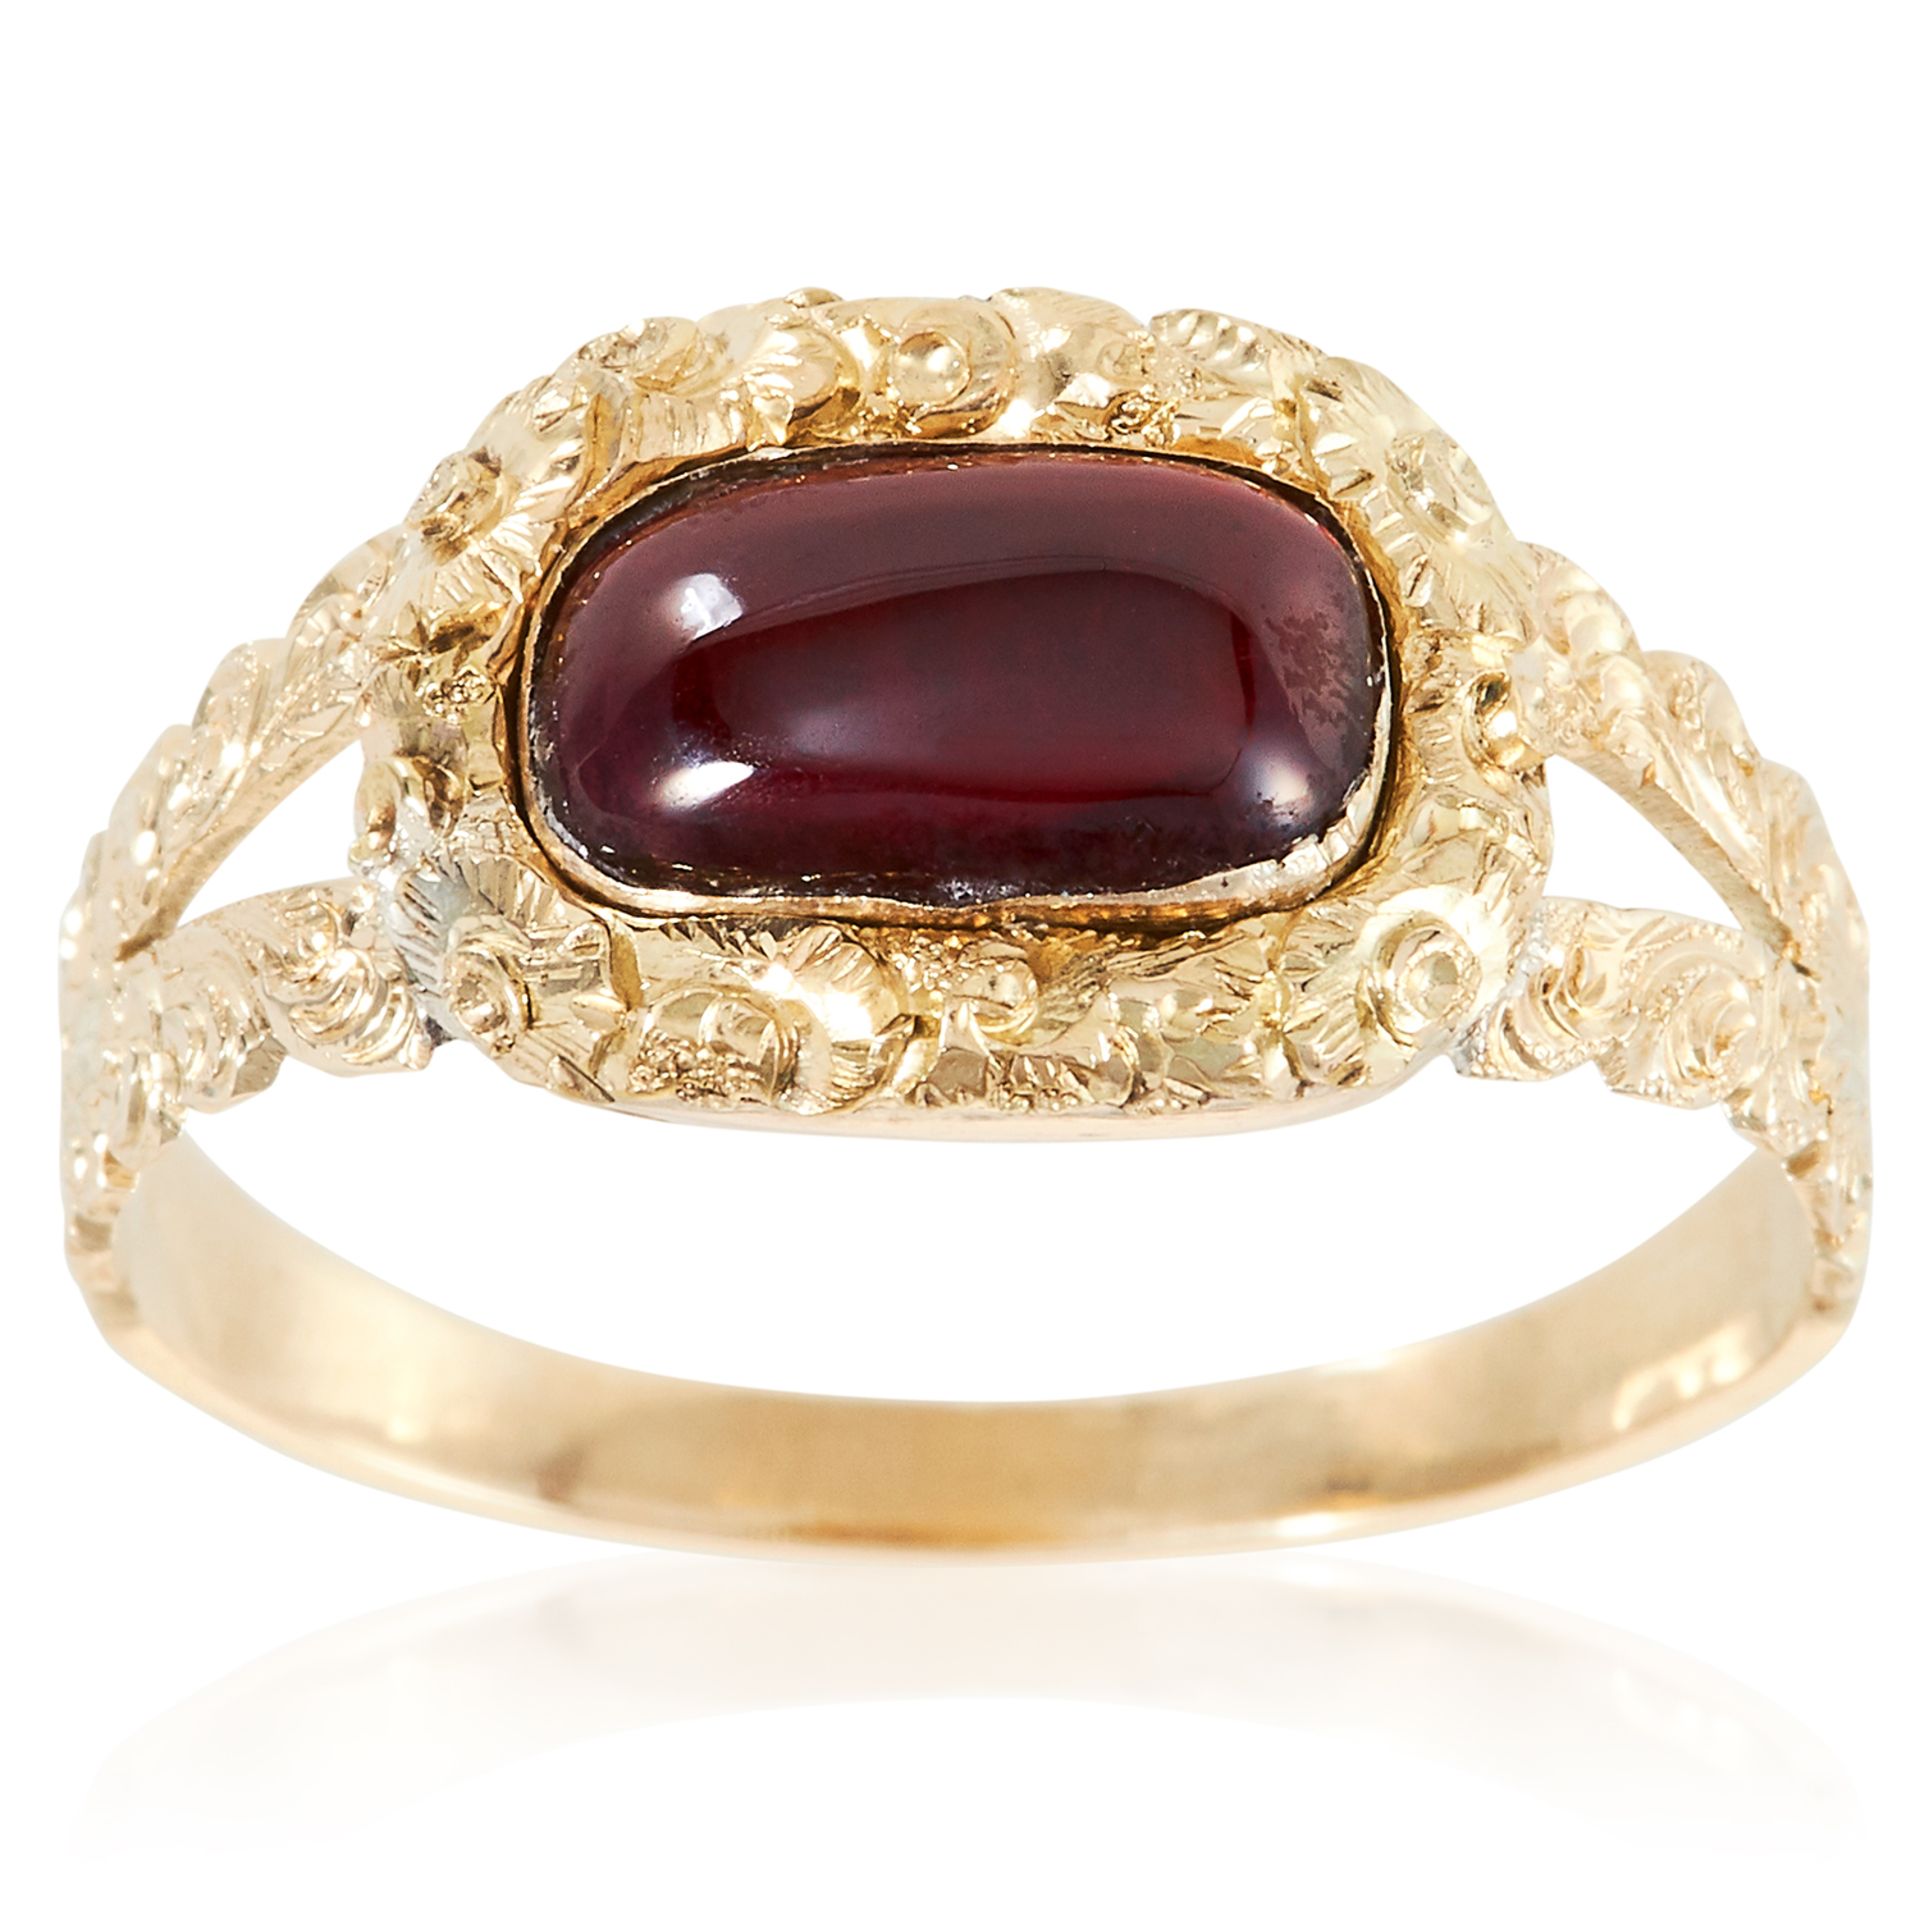 AN ANTIQUE GEORGIAN GARNET RING, EARLY 19TH CENTURY in high carat yellow gold, the oval cabochon